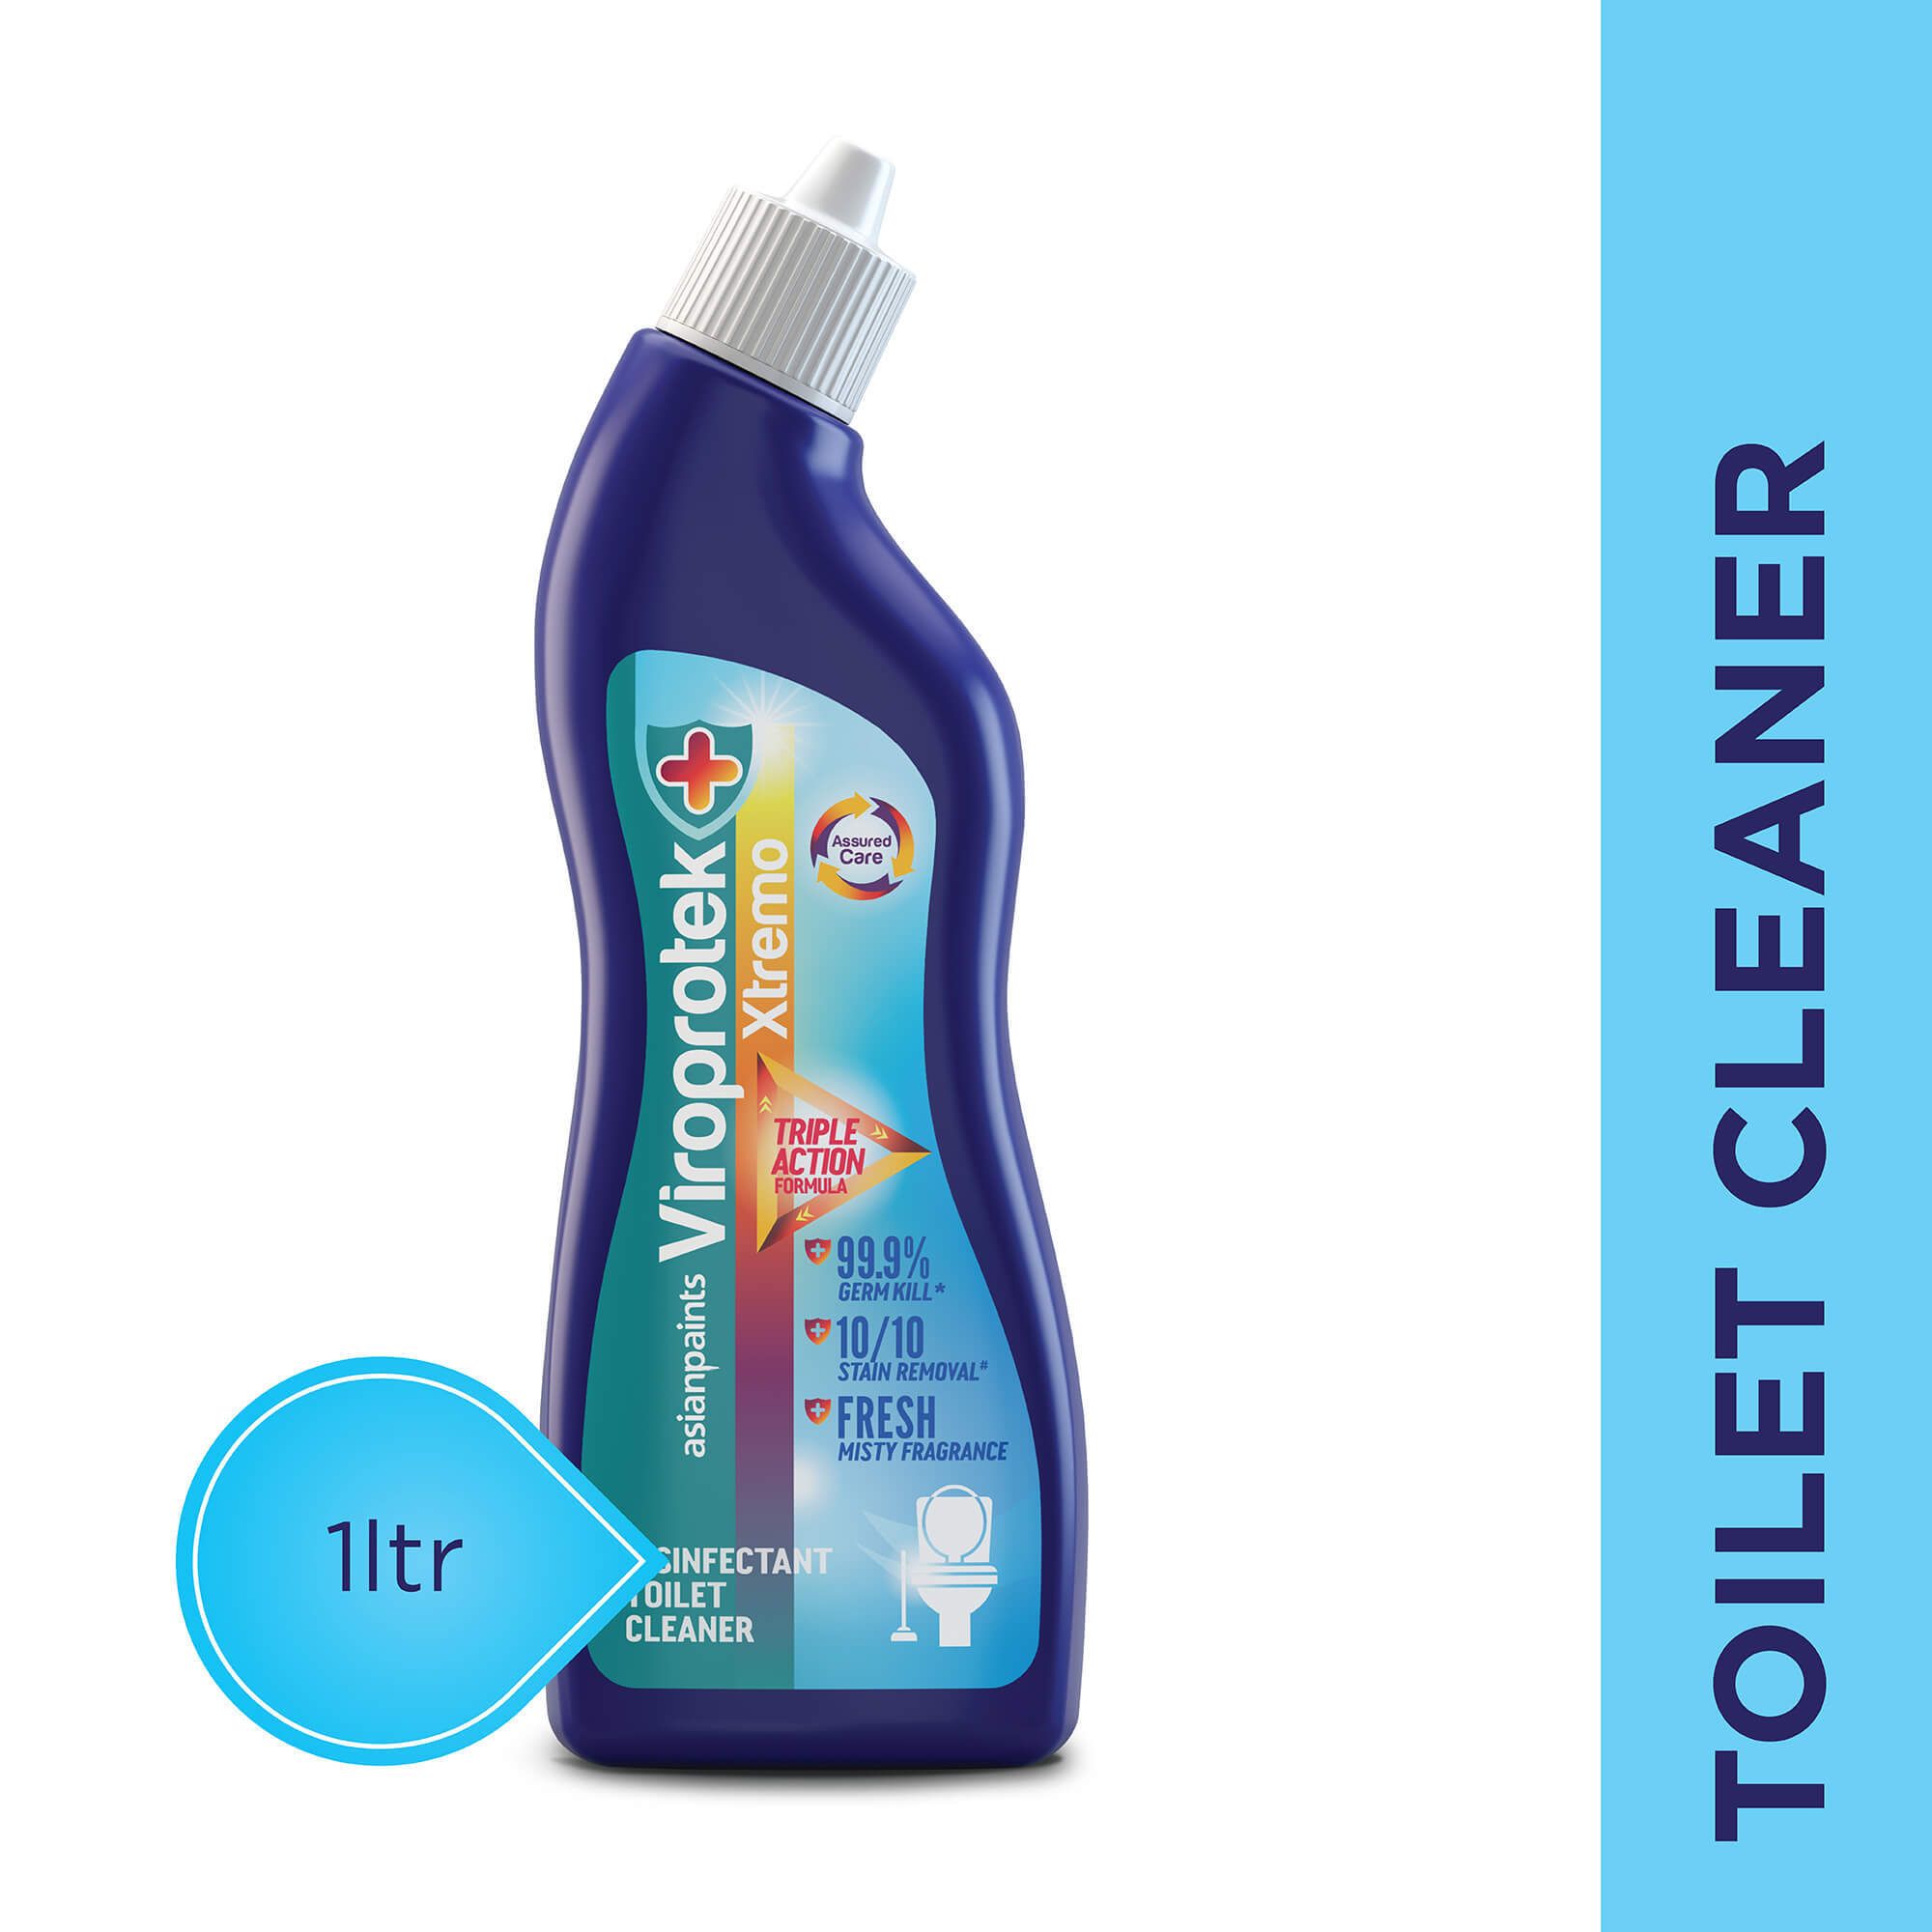 Toilet Cleaner 1L (Pack of 4 ) worth Rs.672 at Rs.423 (After Coupon)